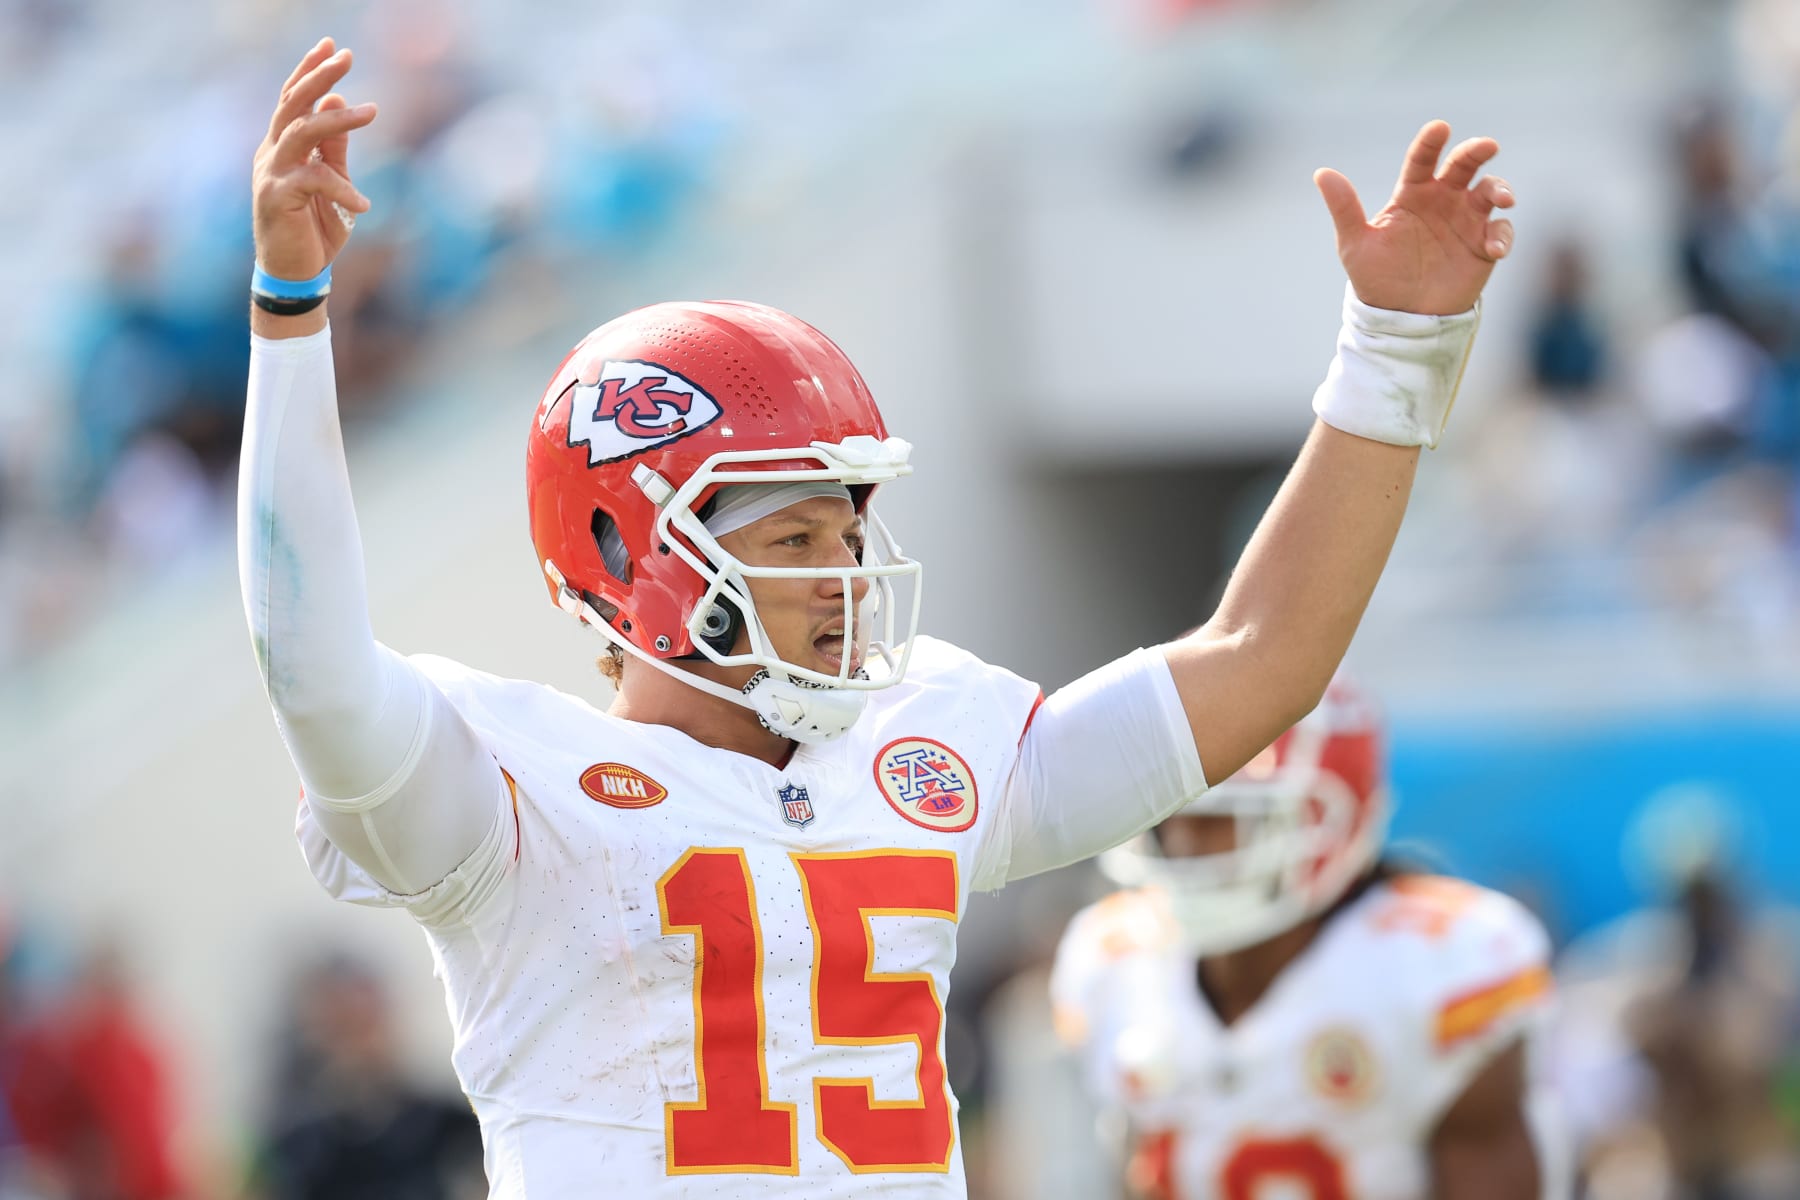 Chiefs rally past Chargers 27-24 in early AFC West showdown – The